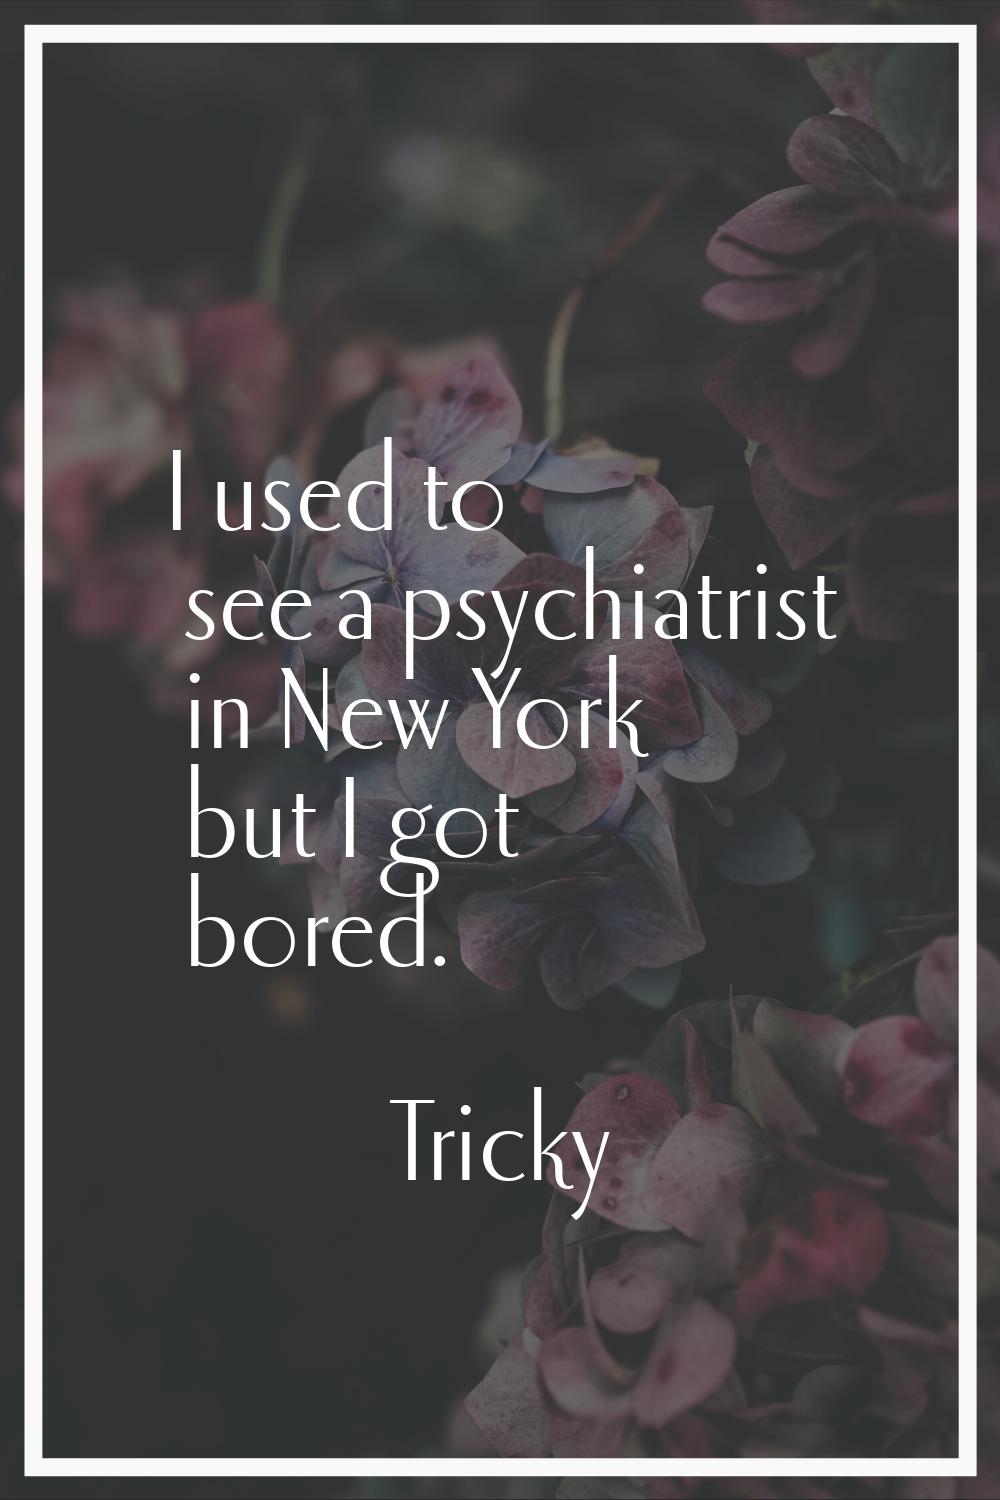 I used to see a psychiatrist in New York but I got bored.